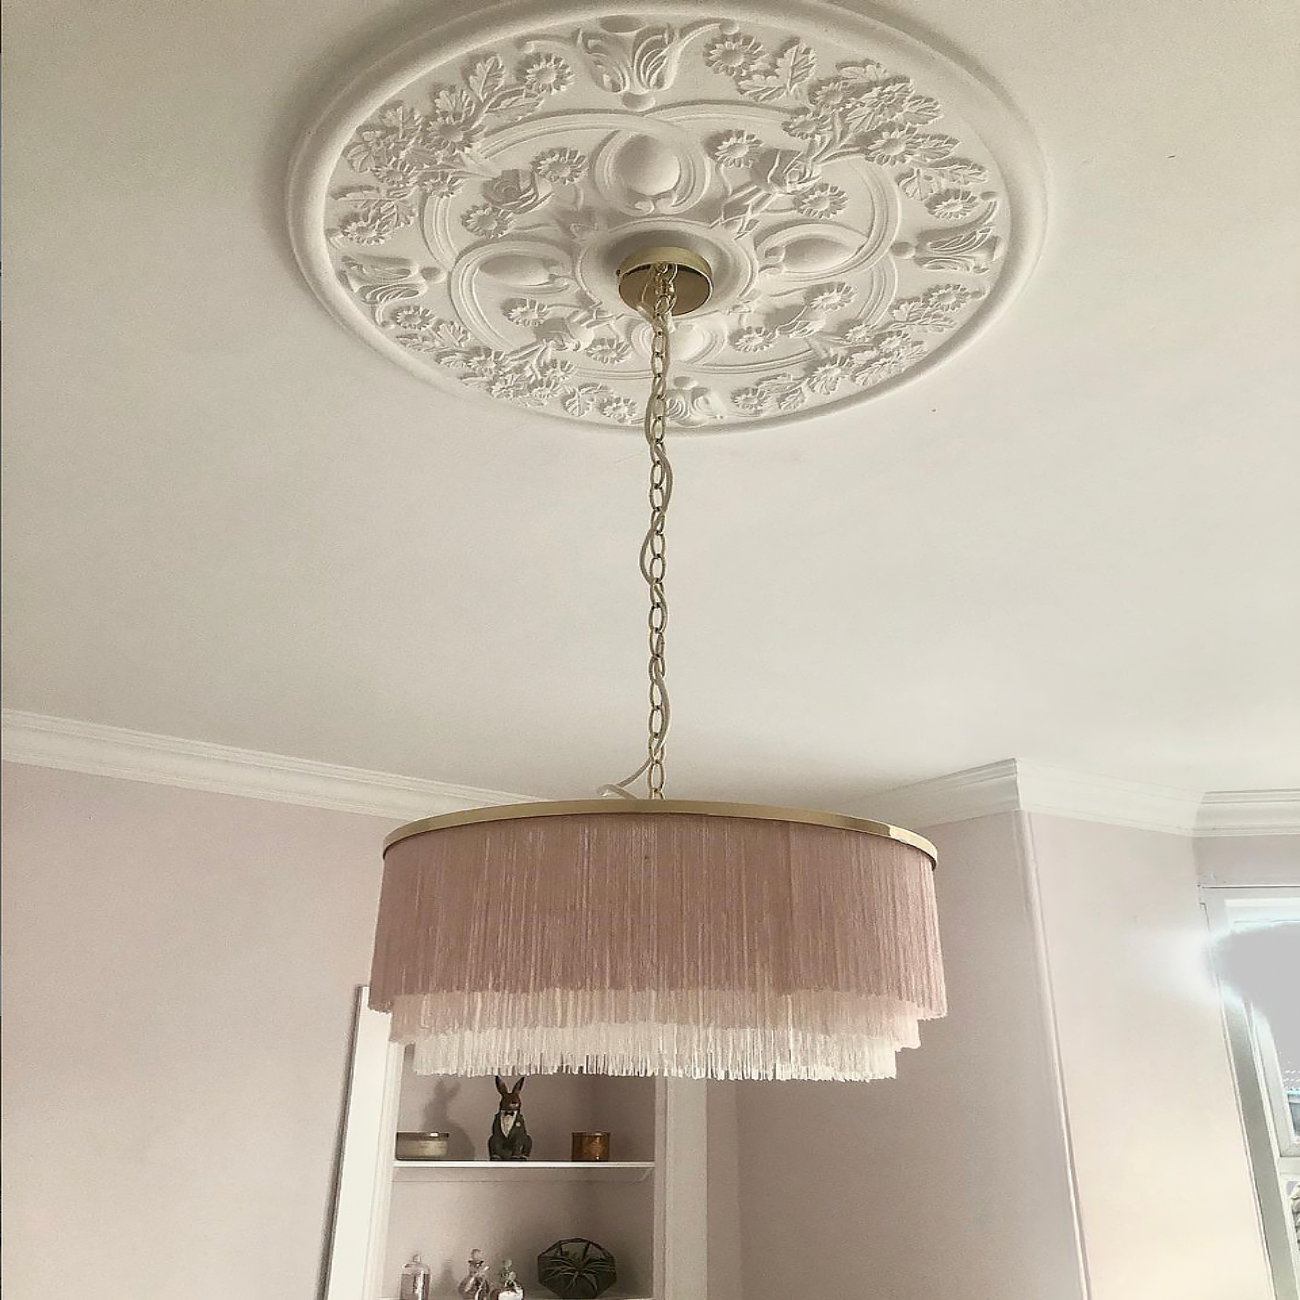 Victorian Gothic Plaster Ceiling Rose in furnished room